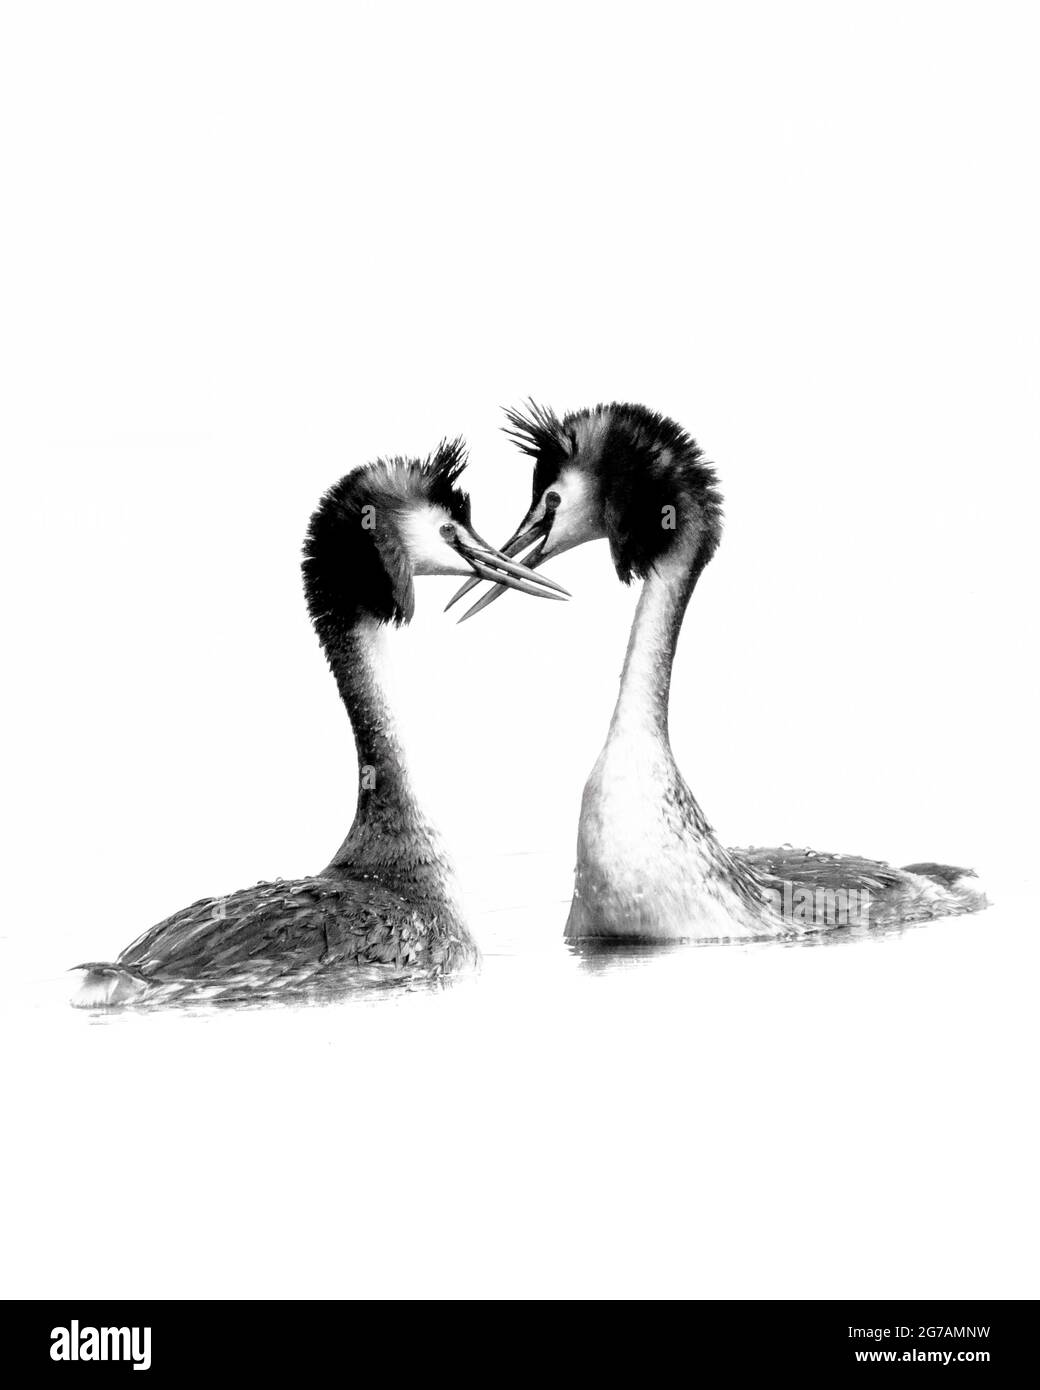 Great crested grebe courtship, black and white Stock Photo